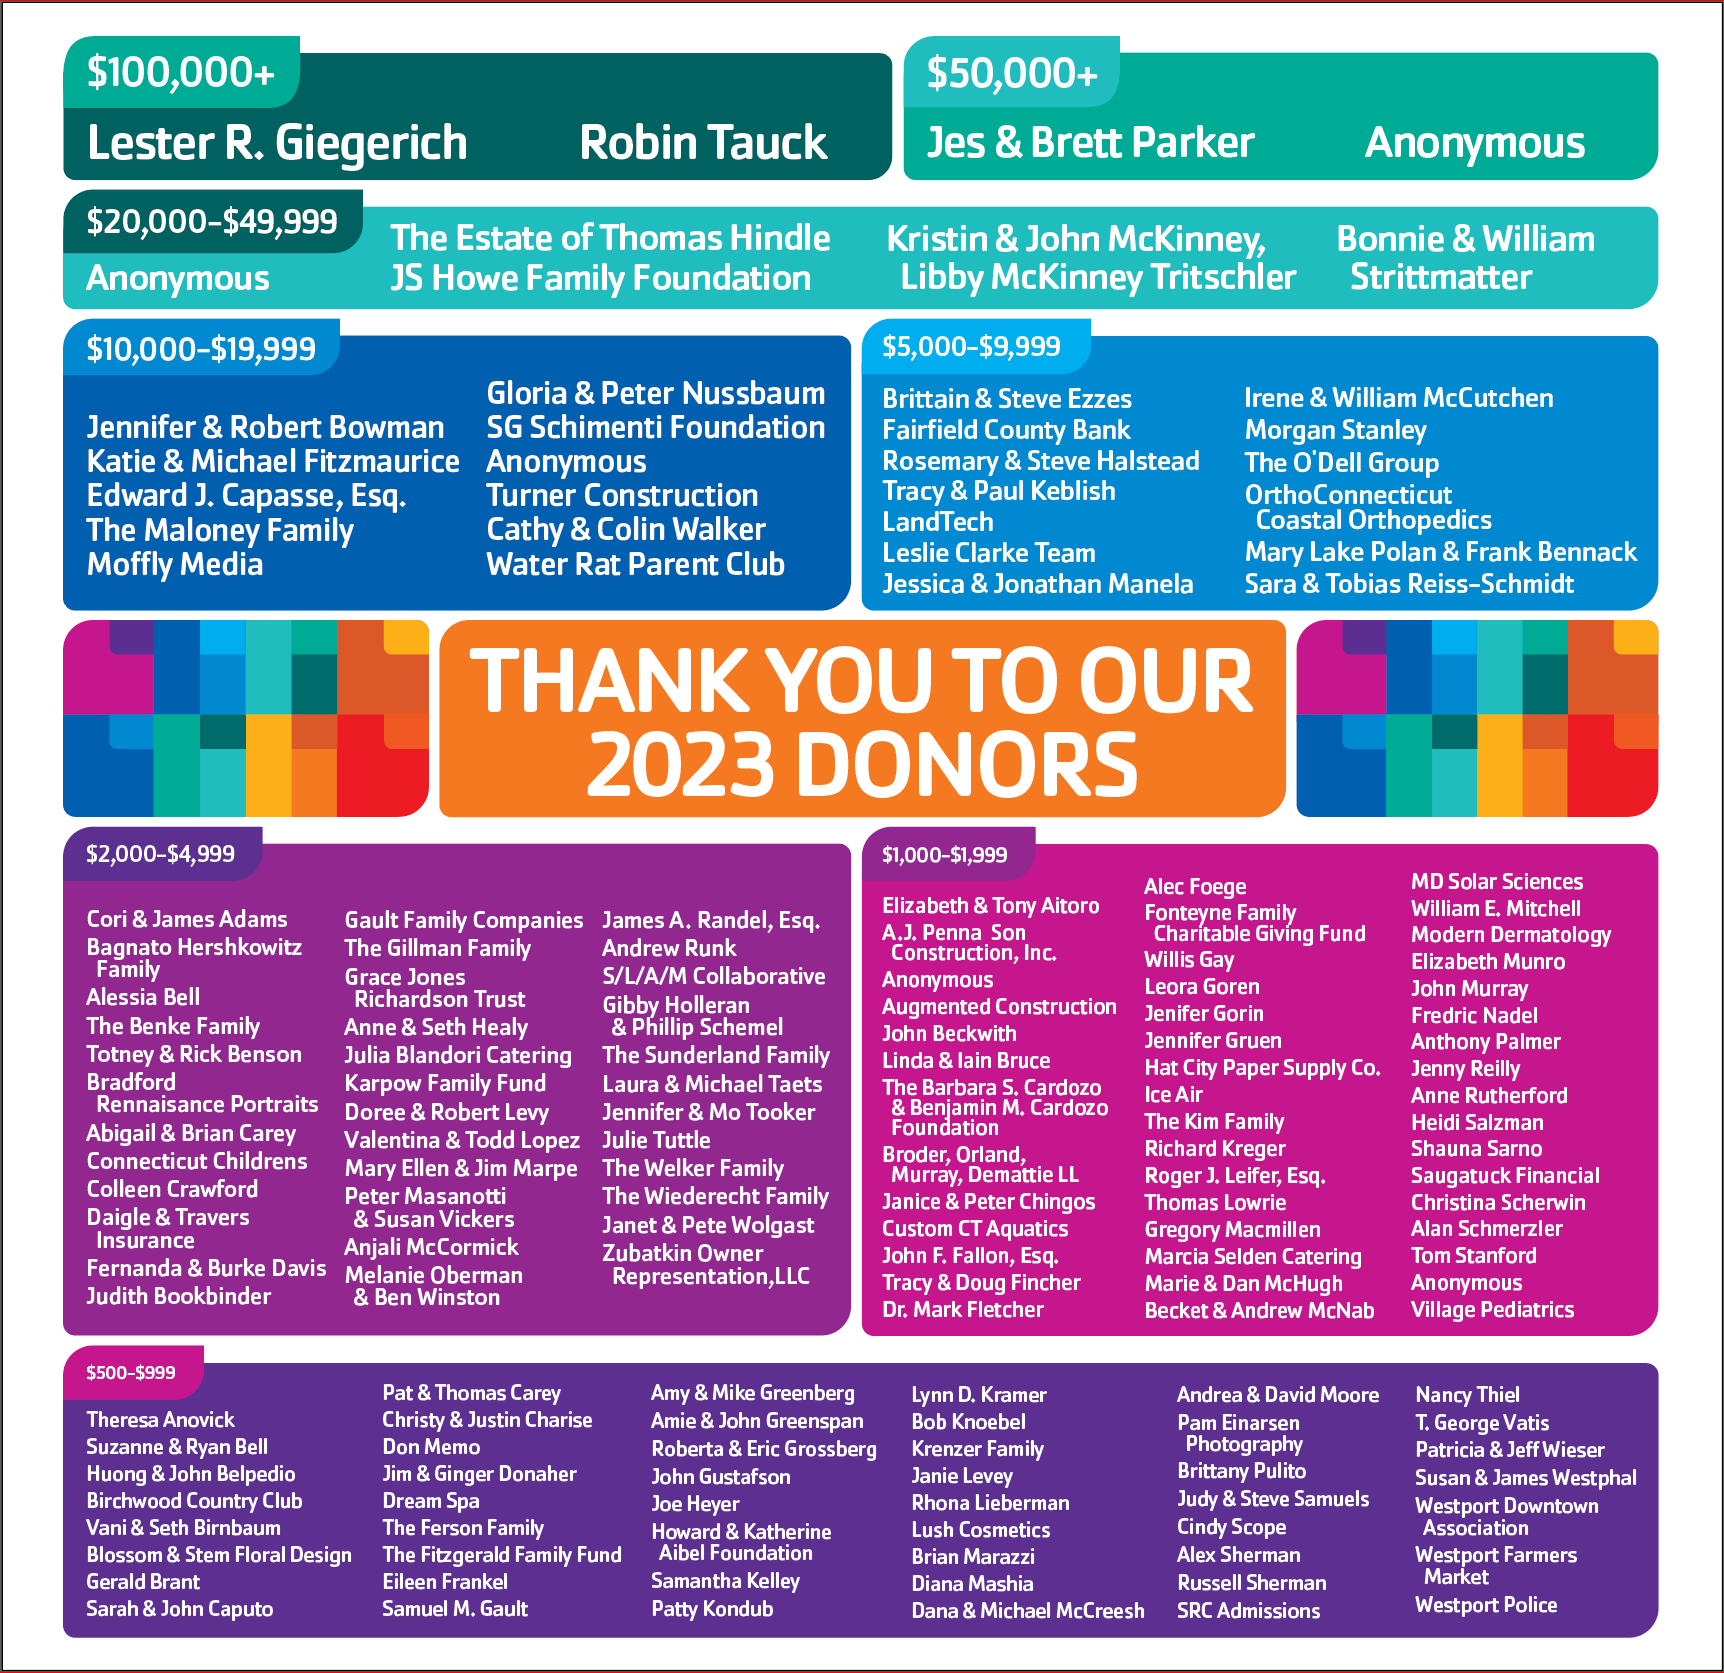 Westport Weston Family YMCA Thank you to our Donors 2023